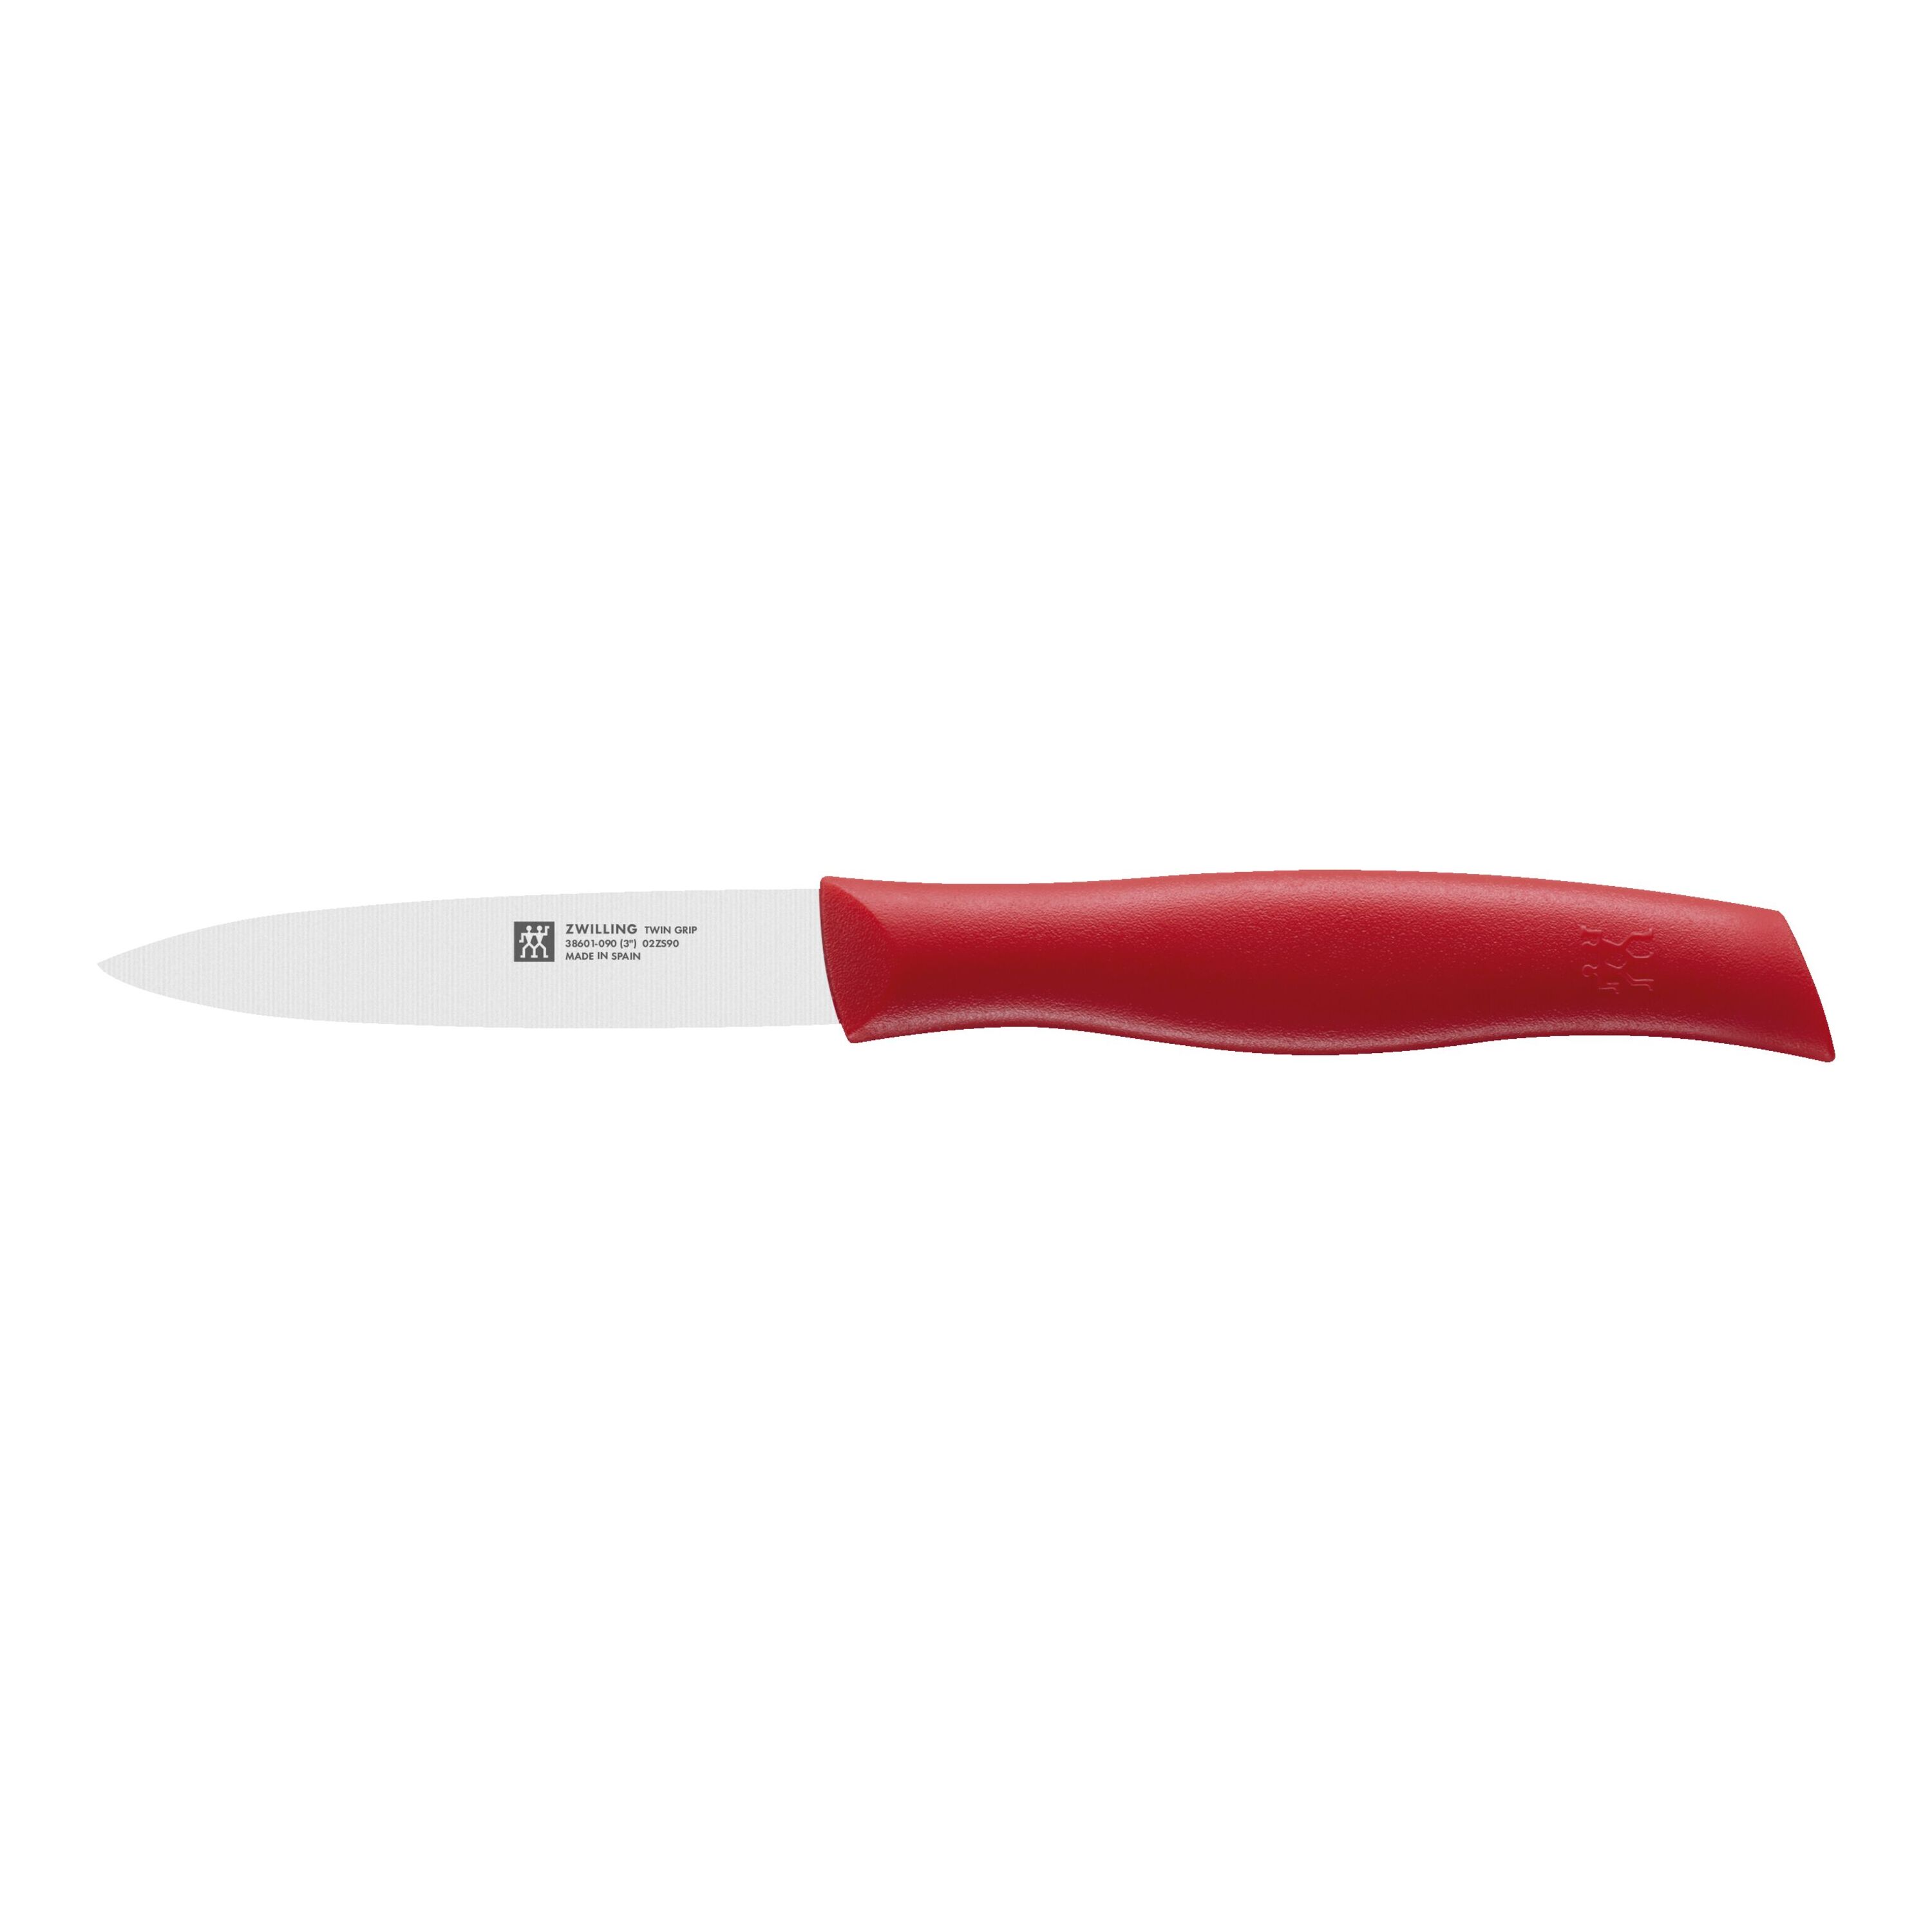 Mainstays Stainless Steel Color 3.5 Kitchen Paring Knife with Red Handle 